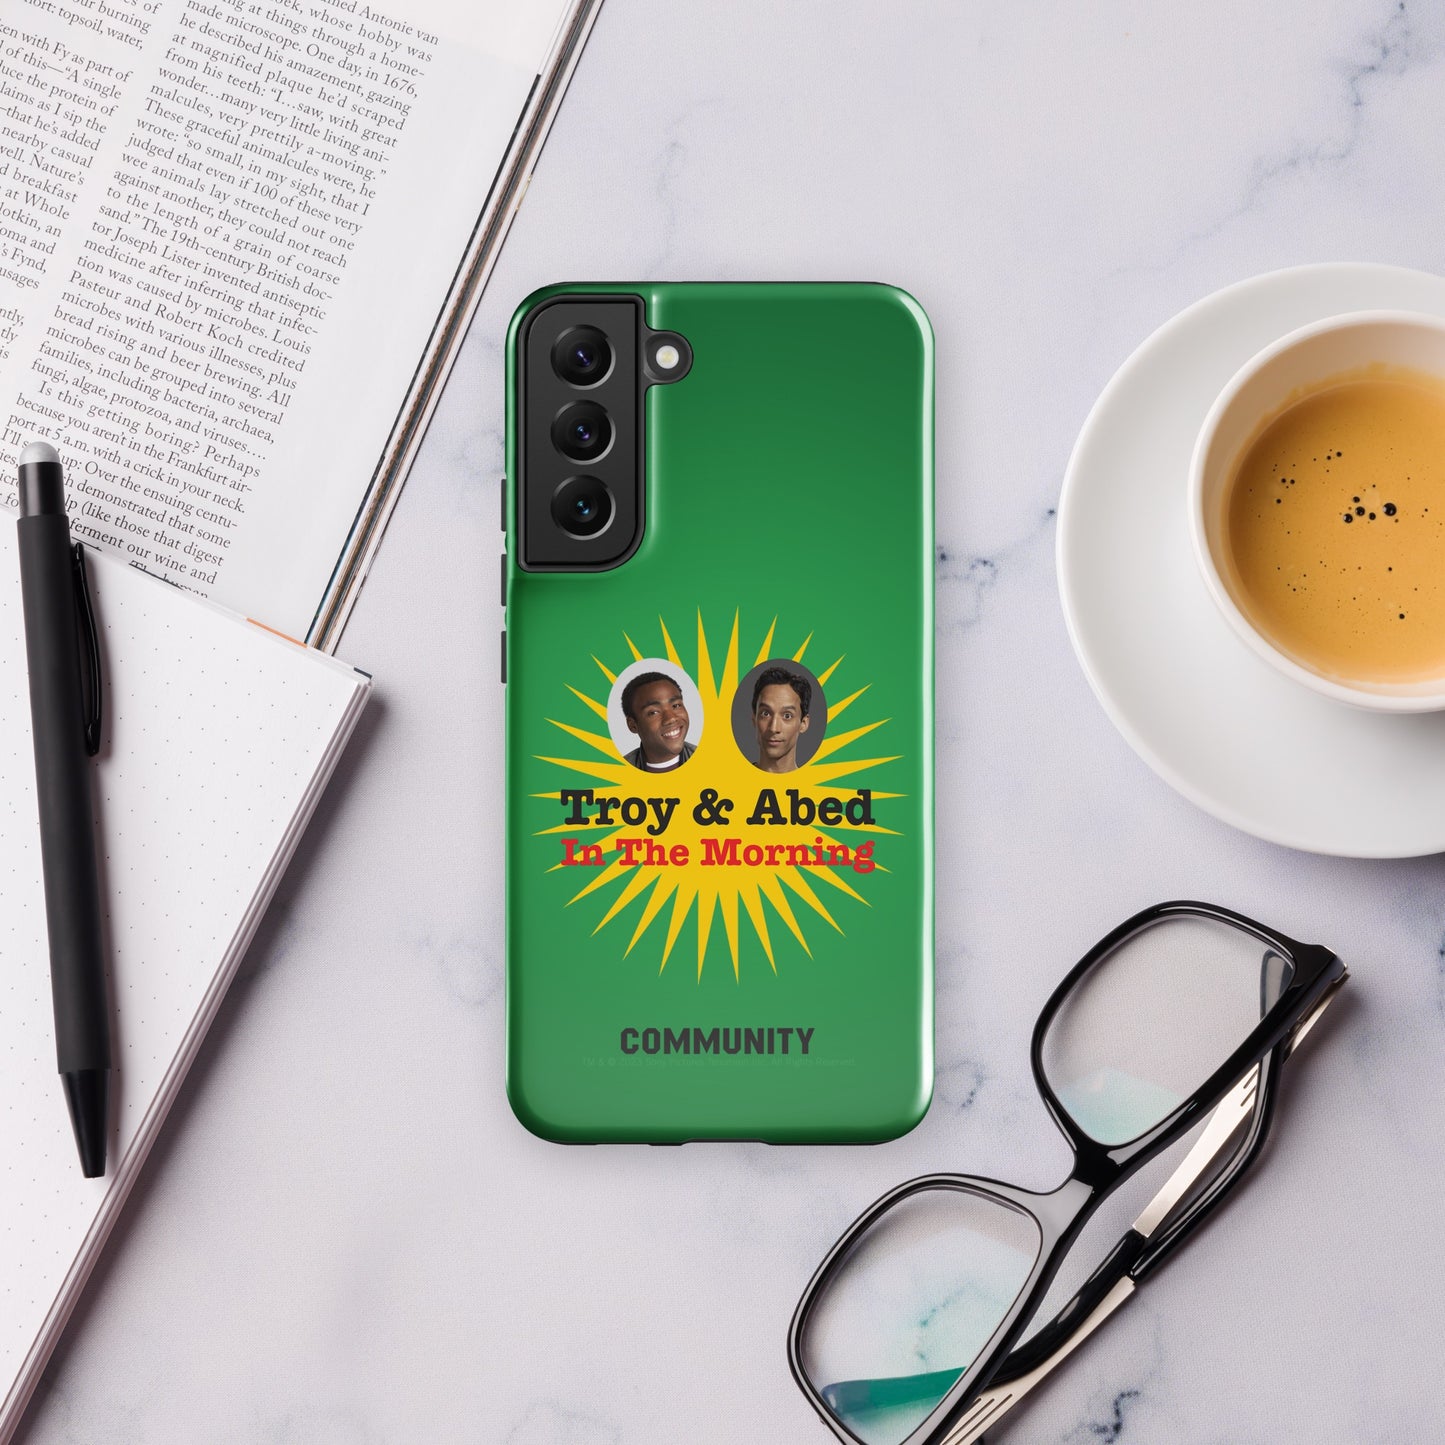 Community In the Morning Tough Phone Case - Samsung